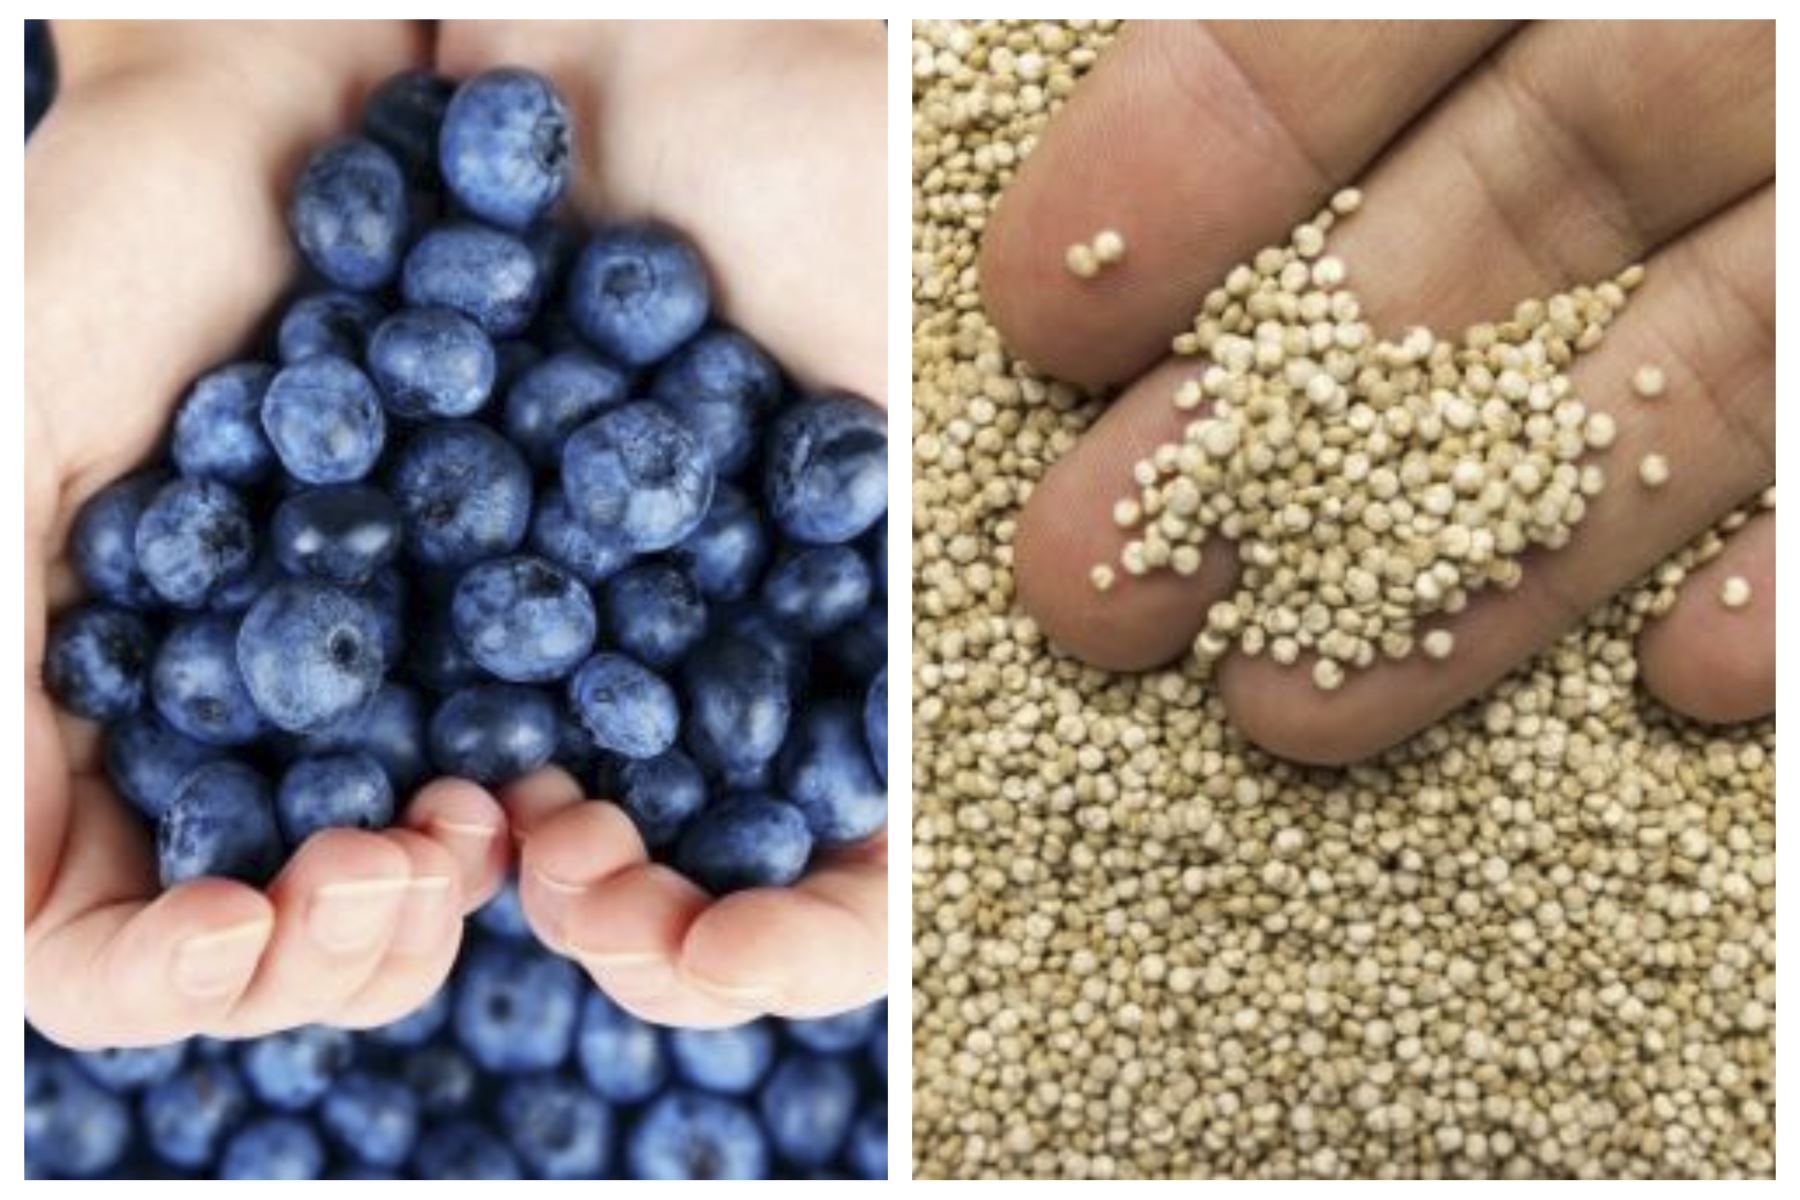 Peru, world’s leading exporter of blueberries and quinoa grains